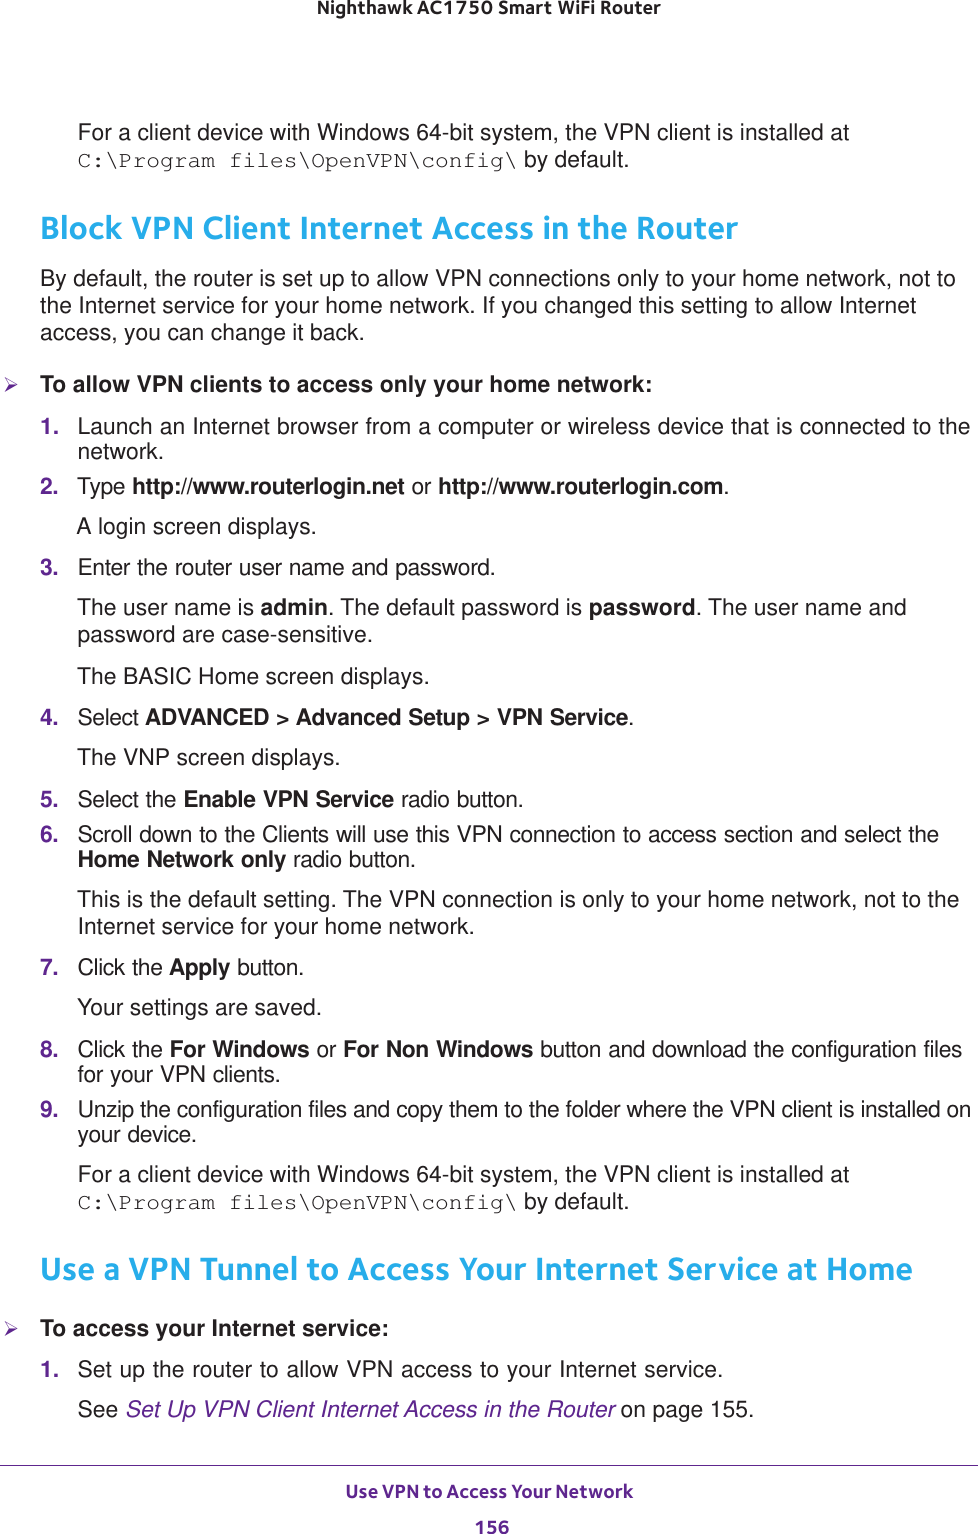 Use VPN to Access Your Network 156Nighthawk AC1750 Smart WiFi Router For a client device with Windows 64-bit system, the VPN client is installed at C:\Program files\OpenVPN\config\ by default.Block VPN Client Internet Access in the RouterBy default, the router is set up to allow VPN connections only to your home network, not to the Internet service for your home network. If you changed this setting to allow Internet access, you can change it back.To allow VPN clients to access only your home network:1.  Launch an Internet browser from a computer or wireless device that is connected to the network.2.  Type http://www.routerlogin.net or http://www.routerlogin.com.A login screen displays.3.  Enter the router user name and password.The user name is admin. The default password is password. The user name and password are case-sensitive.The BASIC Home screen displays.4.  Select ADVANCED &gt; Advanced Setup &gt; VPN Service.The VNP screen displays.5.  Select the Enable VPN Service radio button.6.  Scroll down to the Clients will use this VPN connection to access section and select the Home Network only radio button.This is the default setting. The VPN connection is only to your home network, not to the Internet service for your home network.7.  Click the Apply button.Your settings are saved.8.  Click the For Windows or For Non Windows button and download the configuration files for your VPN clients.9.  Unzip the configuration files and copy them to the folder where the VPN client is installed on your device. For a client device with Windows 64-bit system, the VPN client is installed at C:\Program files\OpenVPN\config\ by default.Use a VPN Tunnel to Access Your Internet Service at HomeTo access your Internet service:1.  Set up the router to allow VPN access to your Internet service.See Set Up VPN Client Internet Access in the Router on page  155.